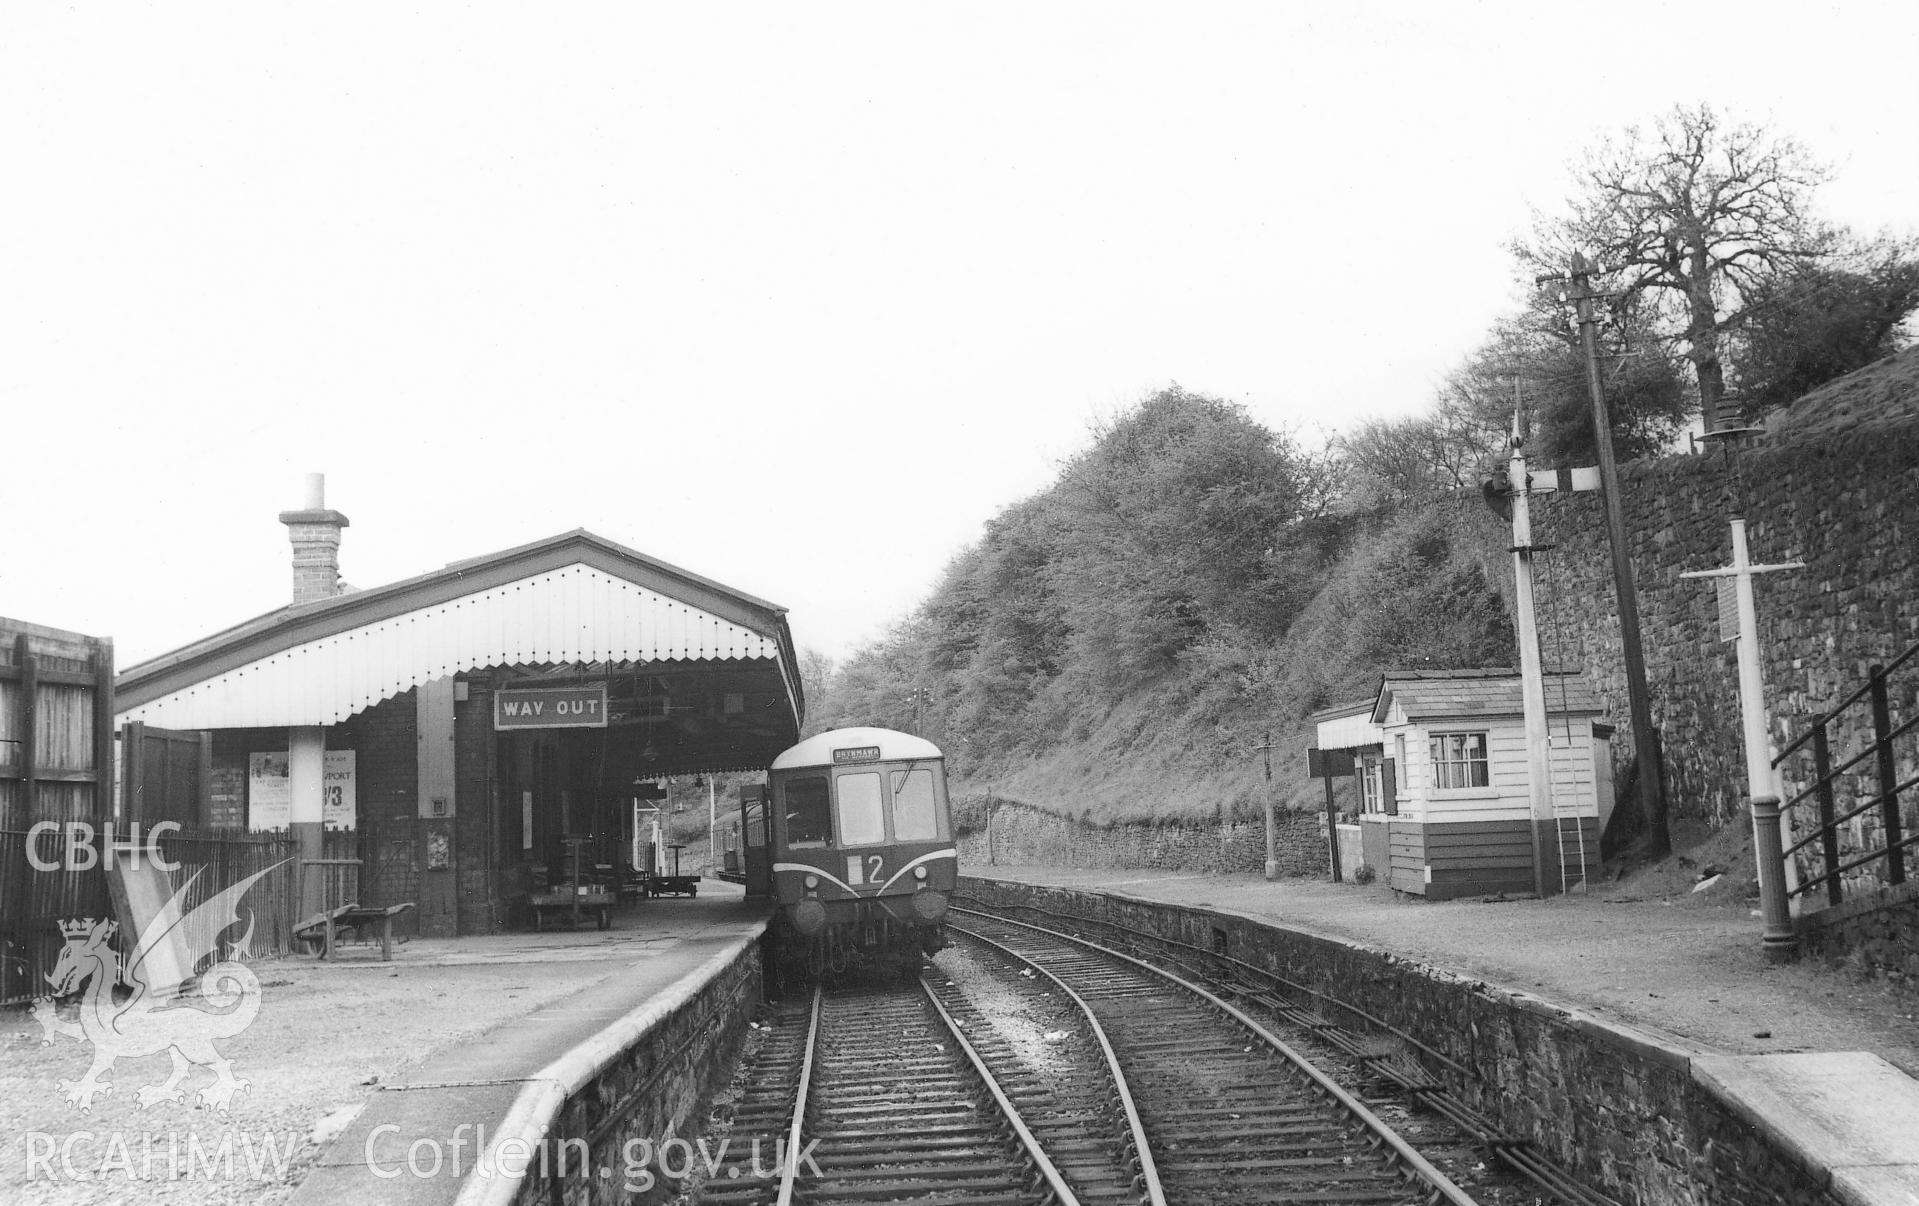 Black and white postcard showing view of Blaenavon Railway Station (lower level). From Rokeby Album VII part 1 of 2 no.10d. Photograph taken in 1961.